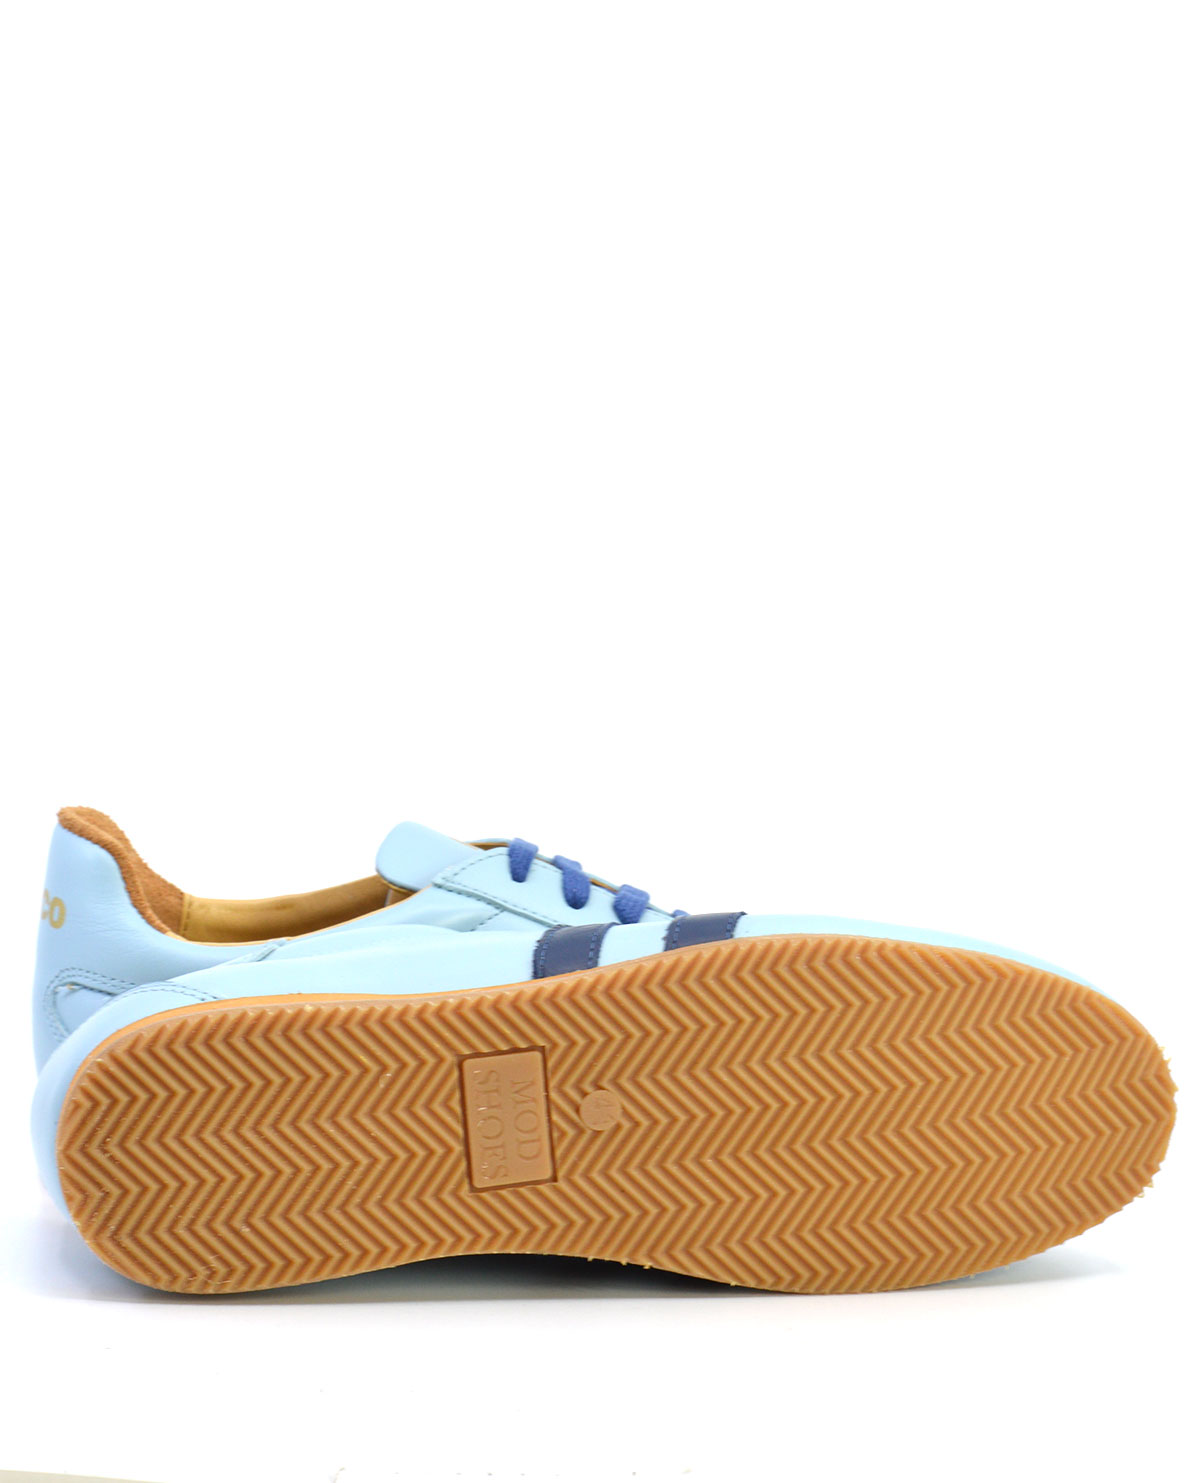 The Ricco In Light Blue & Blue Stripe – Old School Trainers – Mod Shoes